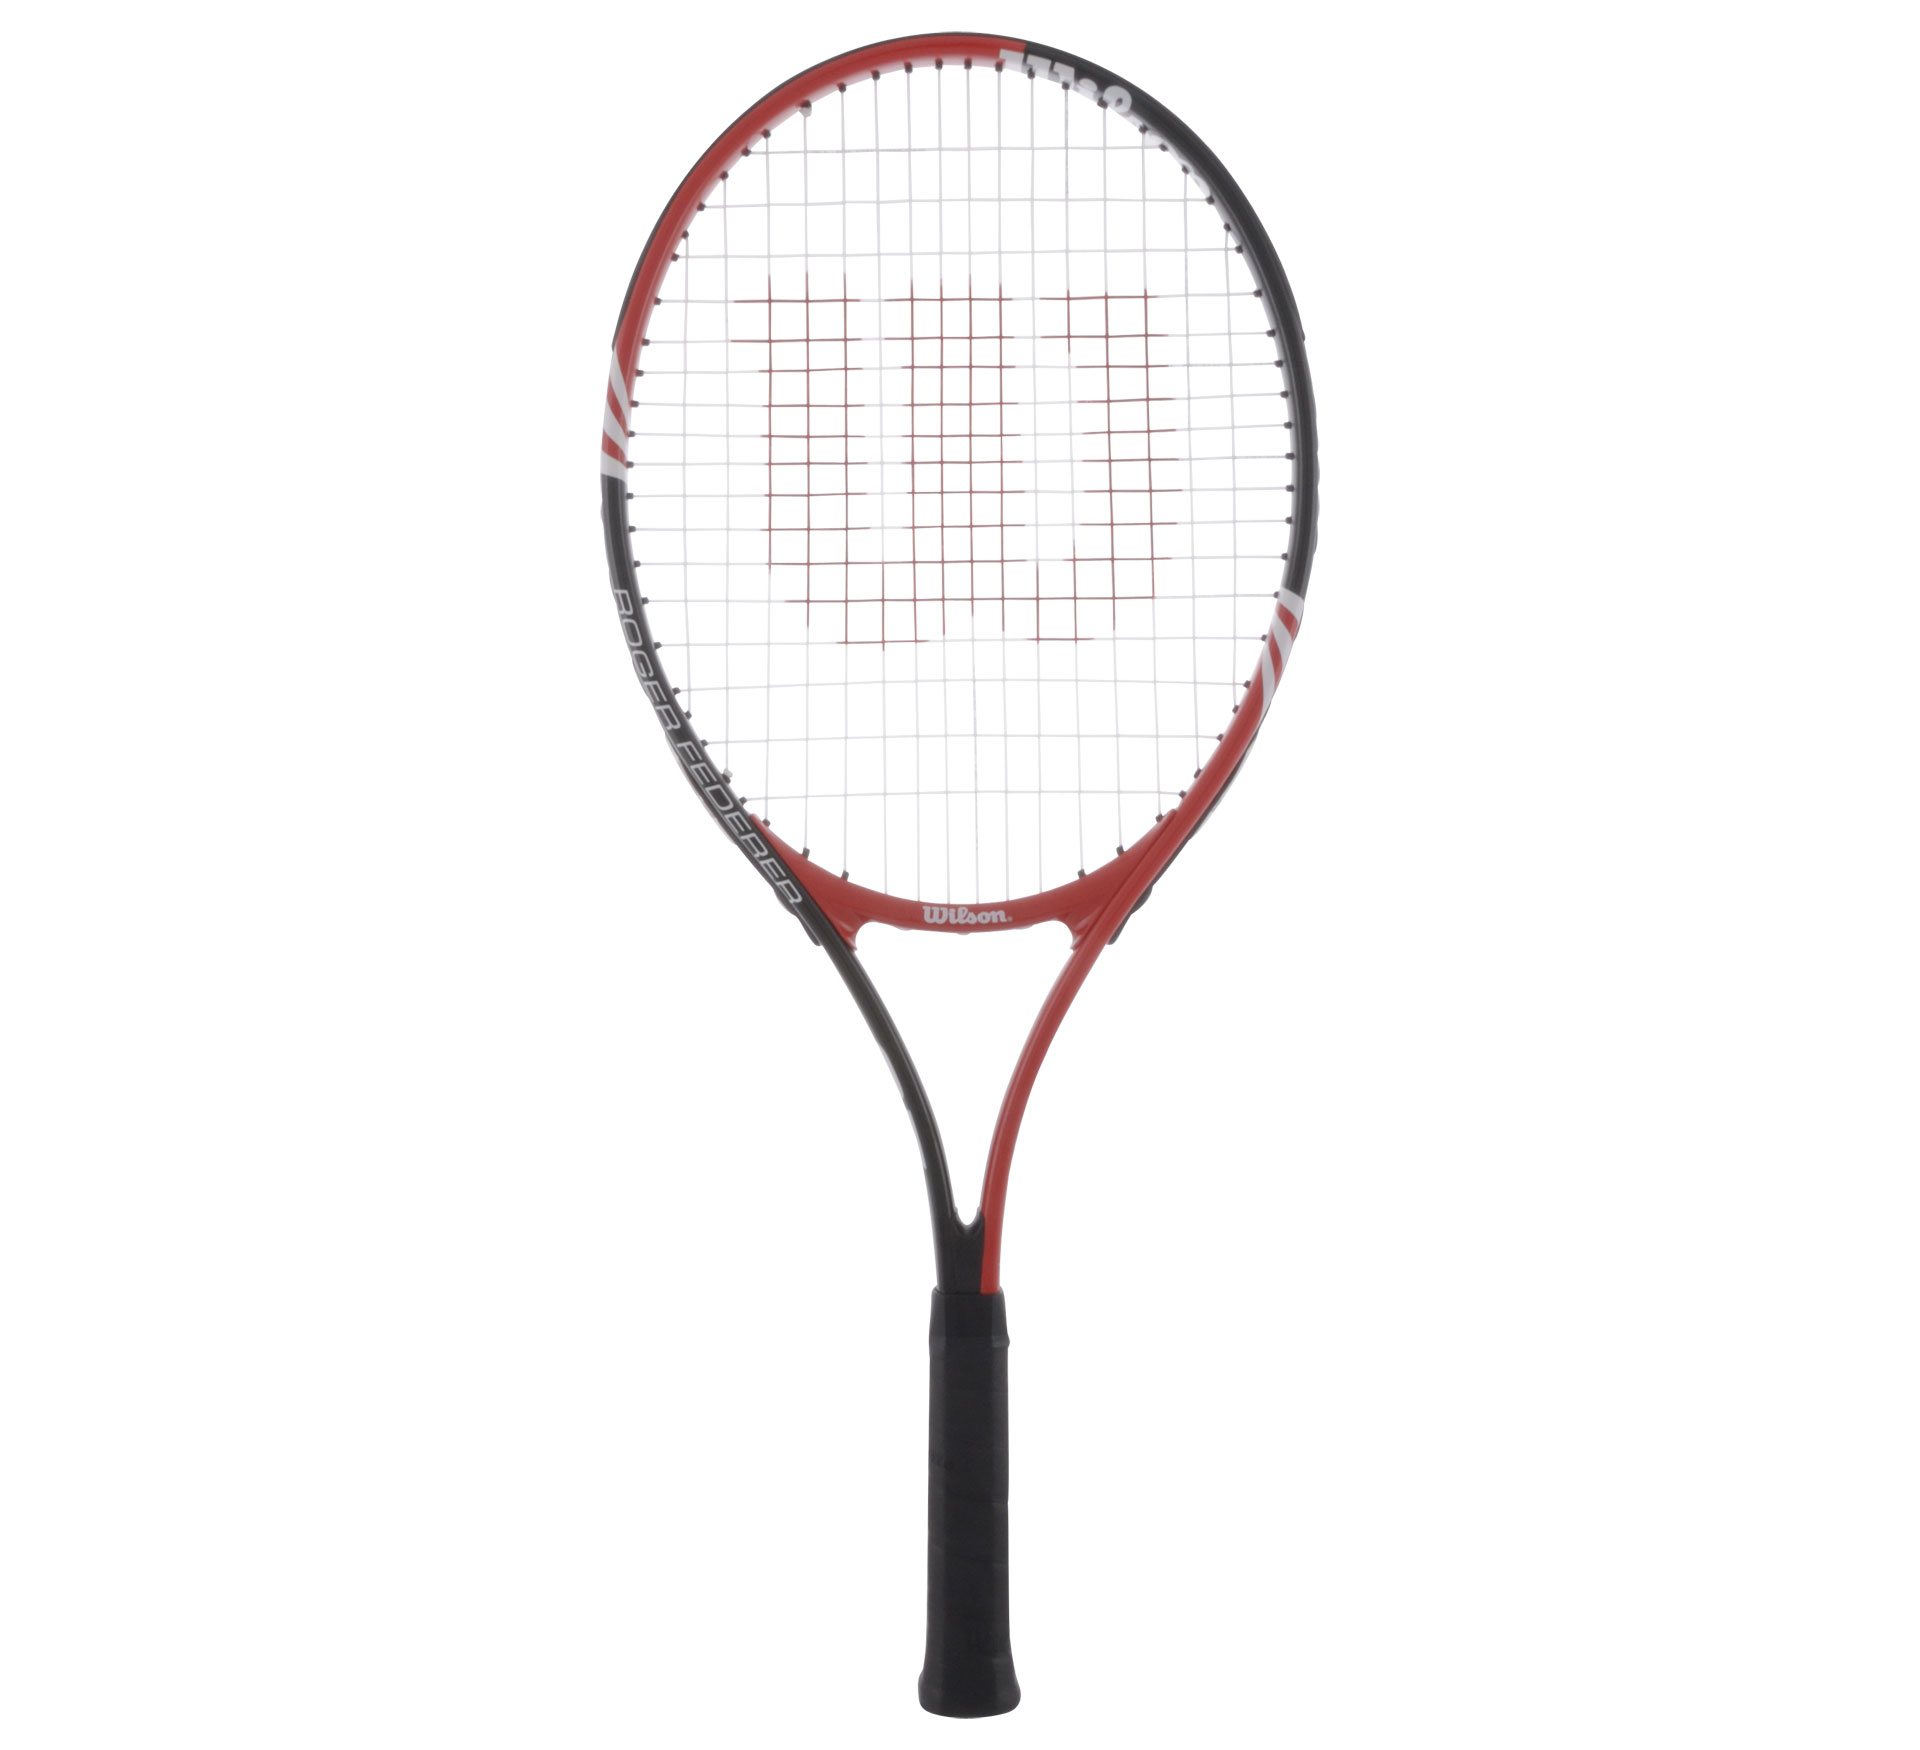 Tennis Rackets - A Comprehensive Guide to Choosing and Using the Best ...